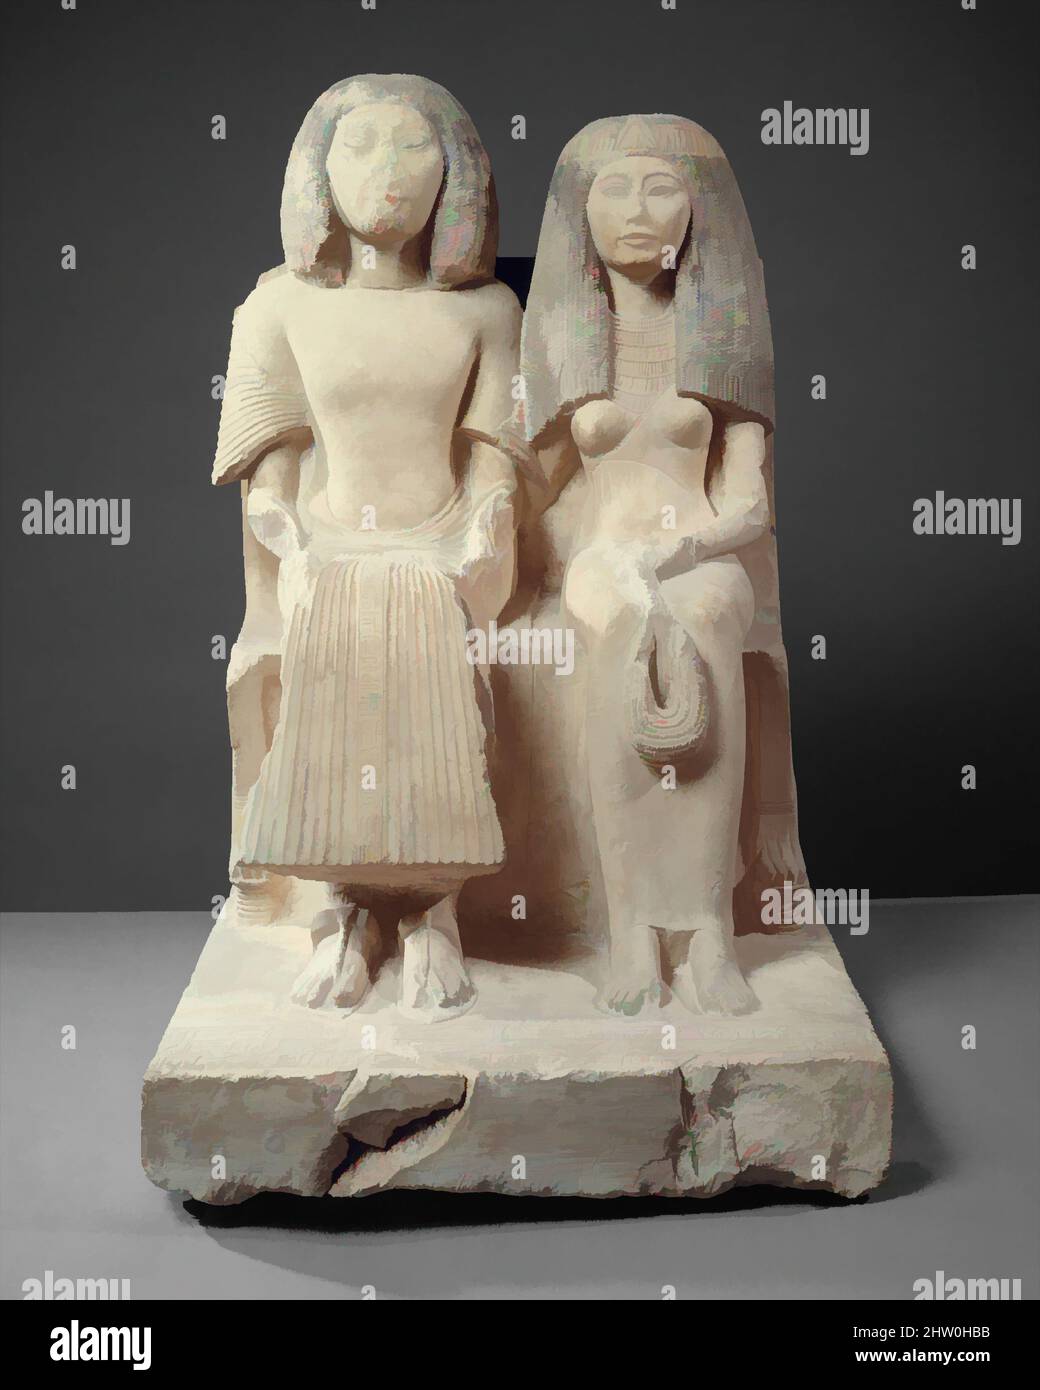 Art inspired by Yuny and His Wife Renenutet, New Kingdom, Ramesside, Dynasty 19, ca. 1294–1279 B.C., From Egypt, Middle Egypt, Asyut (Assiut, Siut; Lykopolis), Tomb of Amenhotep, Necropolis Cliff tomb, Medjdeni, Khashaba excavations, 1913, Limestone, paint, H. 84.5 cm (33 1/4 in); w, Classic works modernized by Artotop with a splash of modernity. Shapes, color and value, eye-catching visual impact on art. Emotions through freedom of artworks in a contemporary way. A timeless message pursuing a wildly creative new direction. Artists turning to the digital medium and creating the Artotop NFT Stock Photo